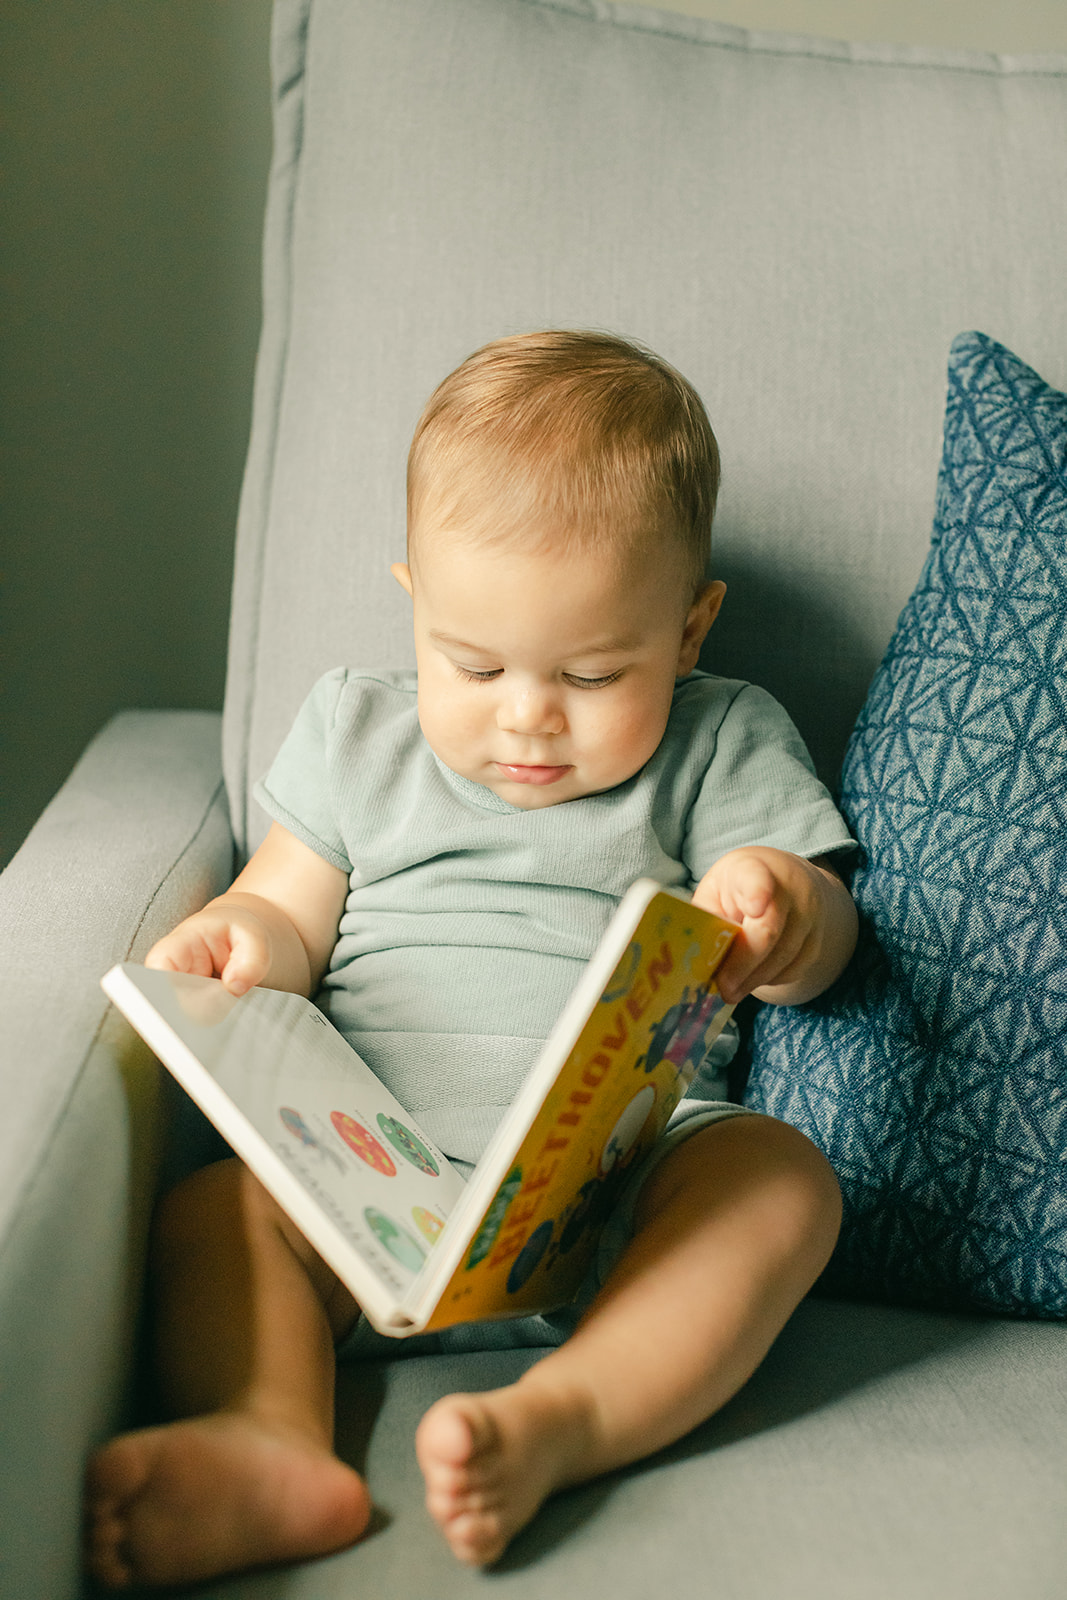 1 year milestone session for baby boy. Cozy at home session. baby boy with book